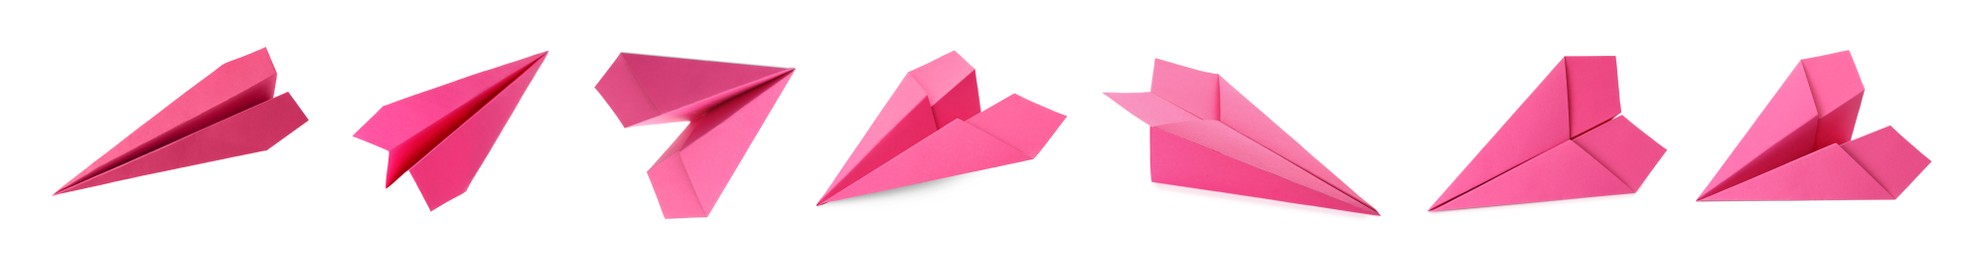 Set with handmade pink paper planes on white background